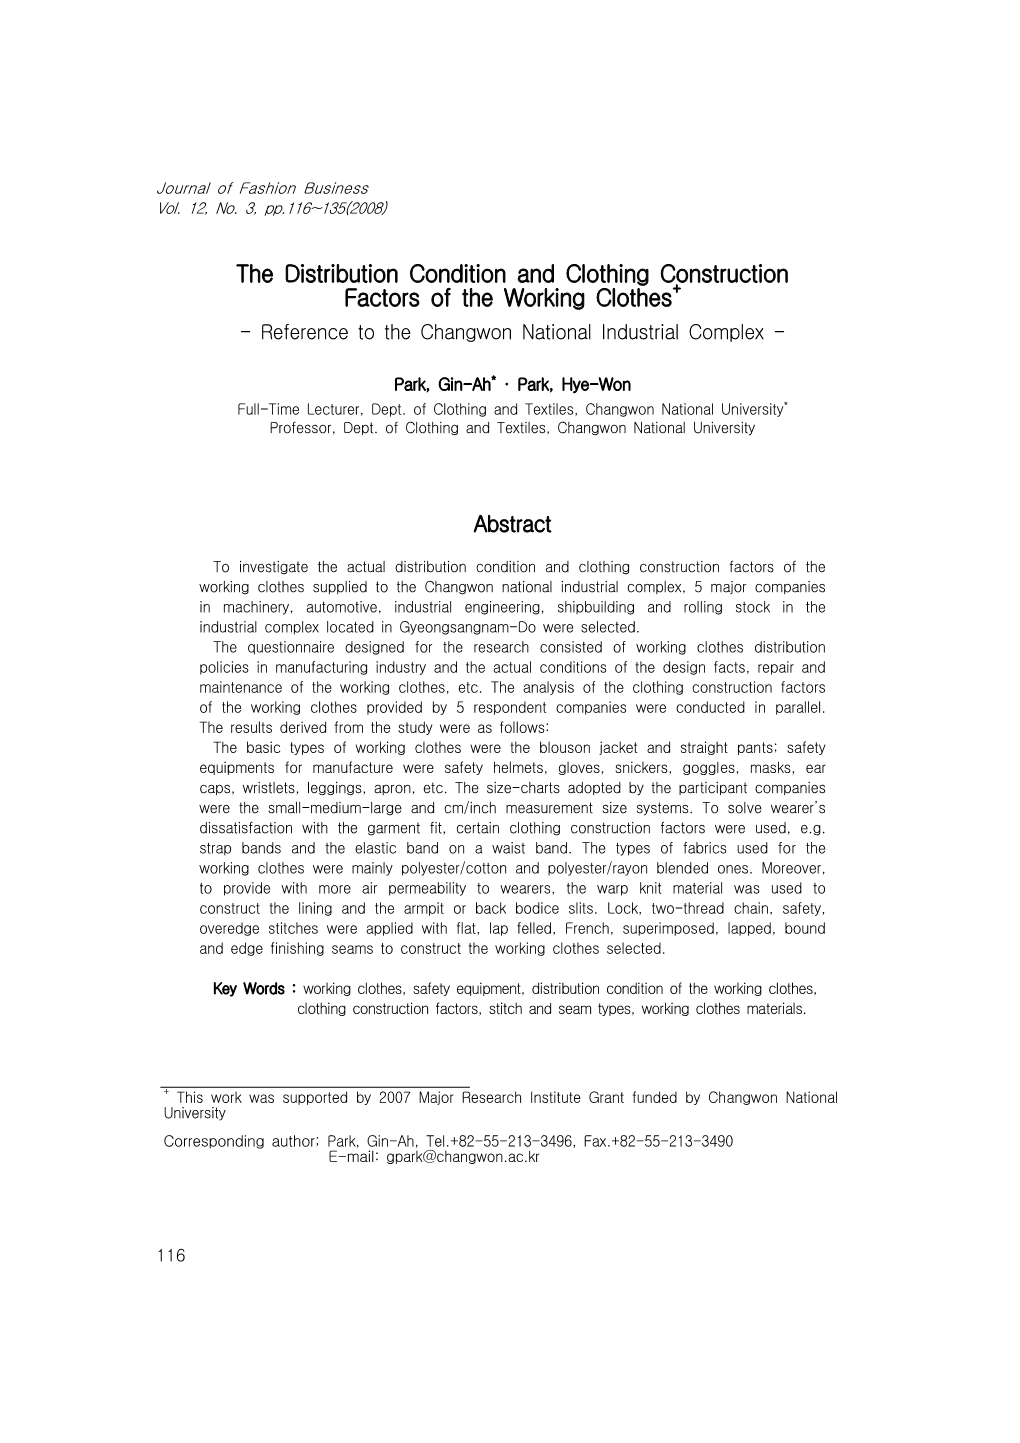 The Distribution Condition and Clothing Construction Factors of the Working Clothes+ - Reference to the Changwon National Industrial Complex